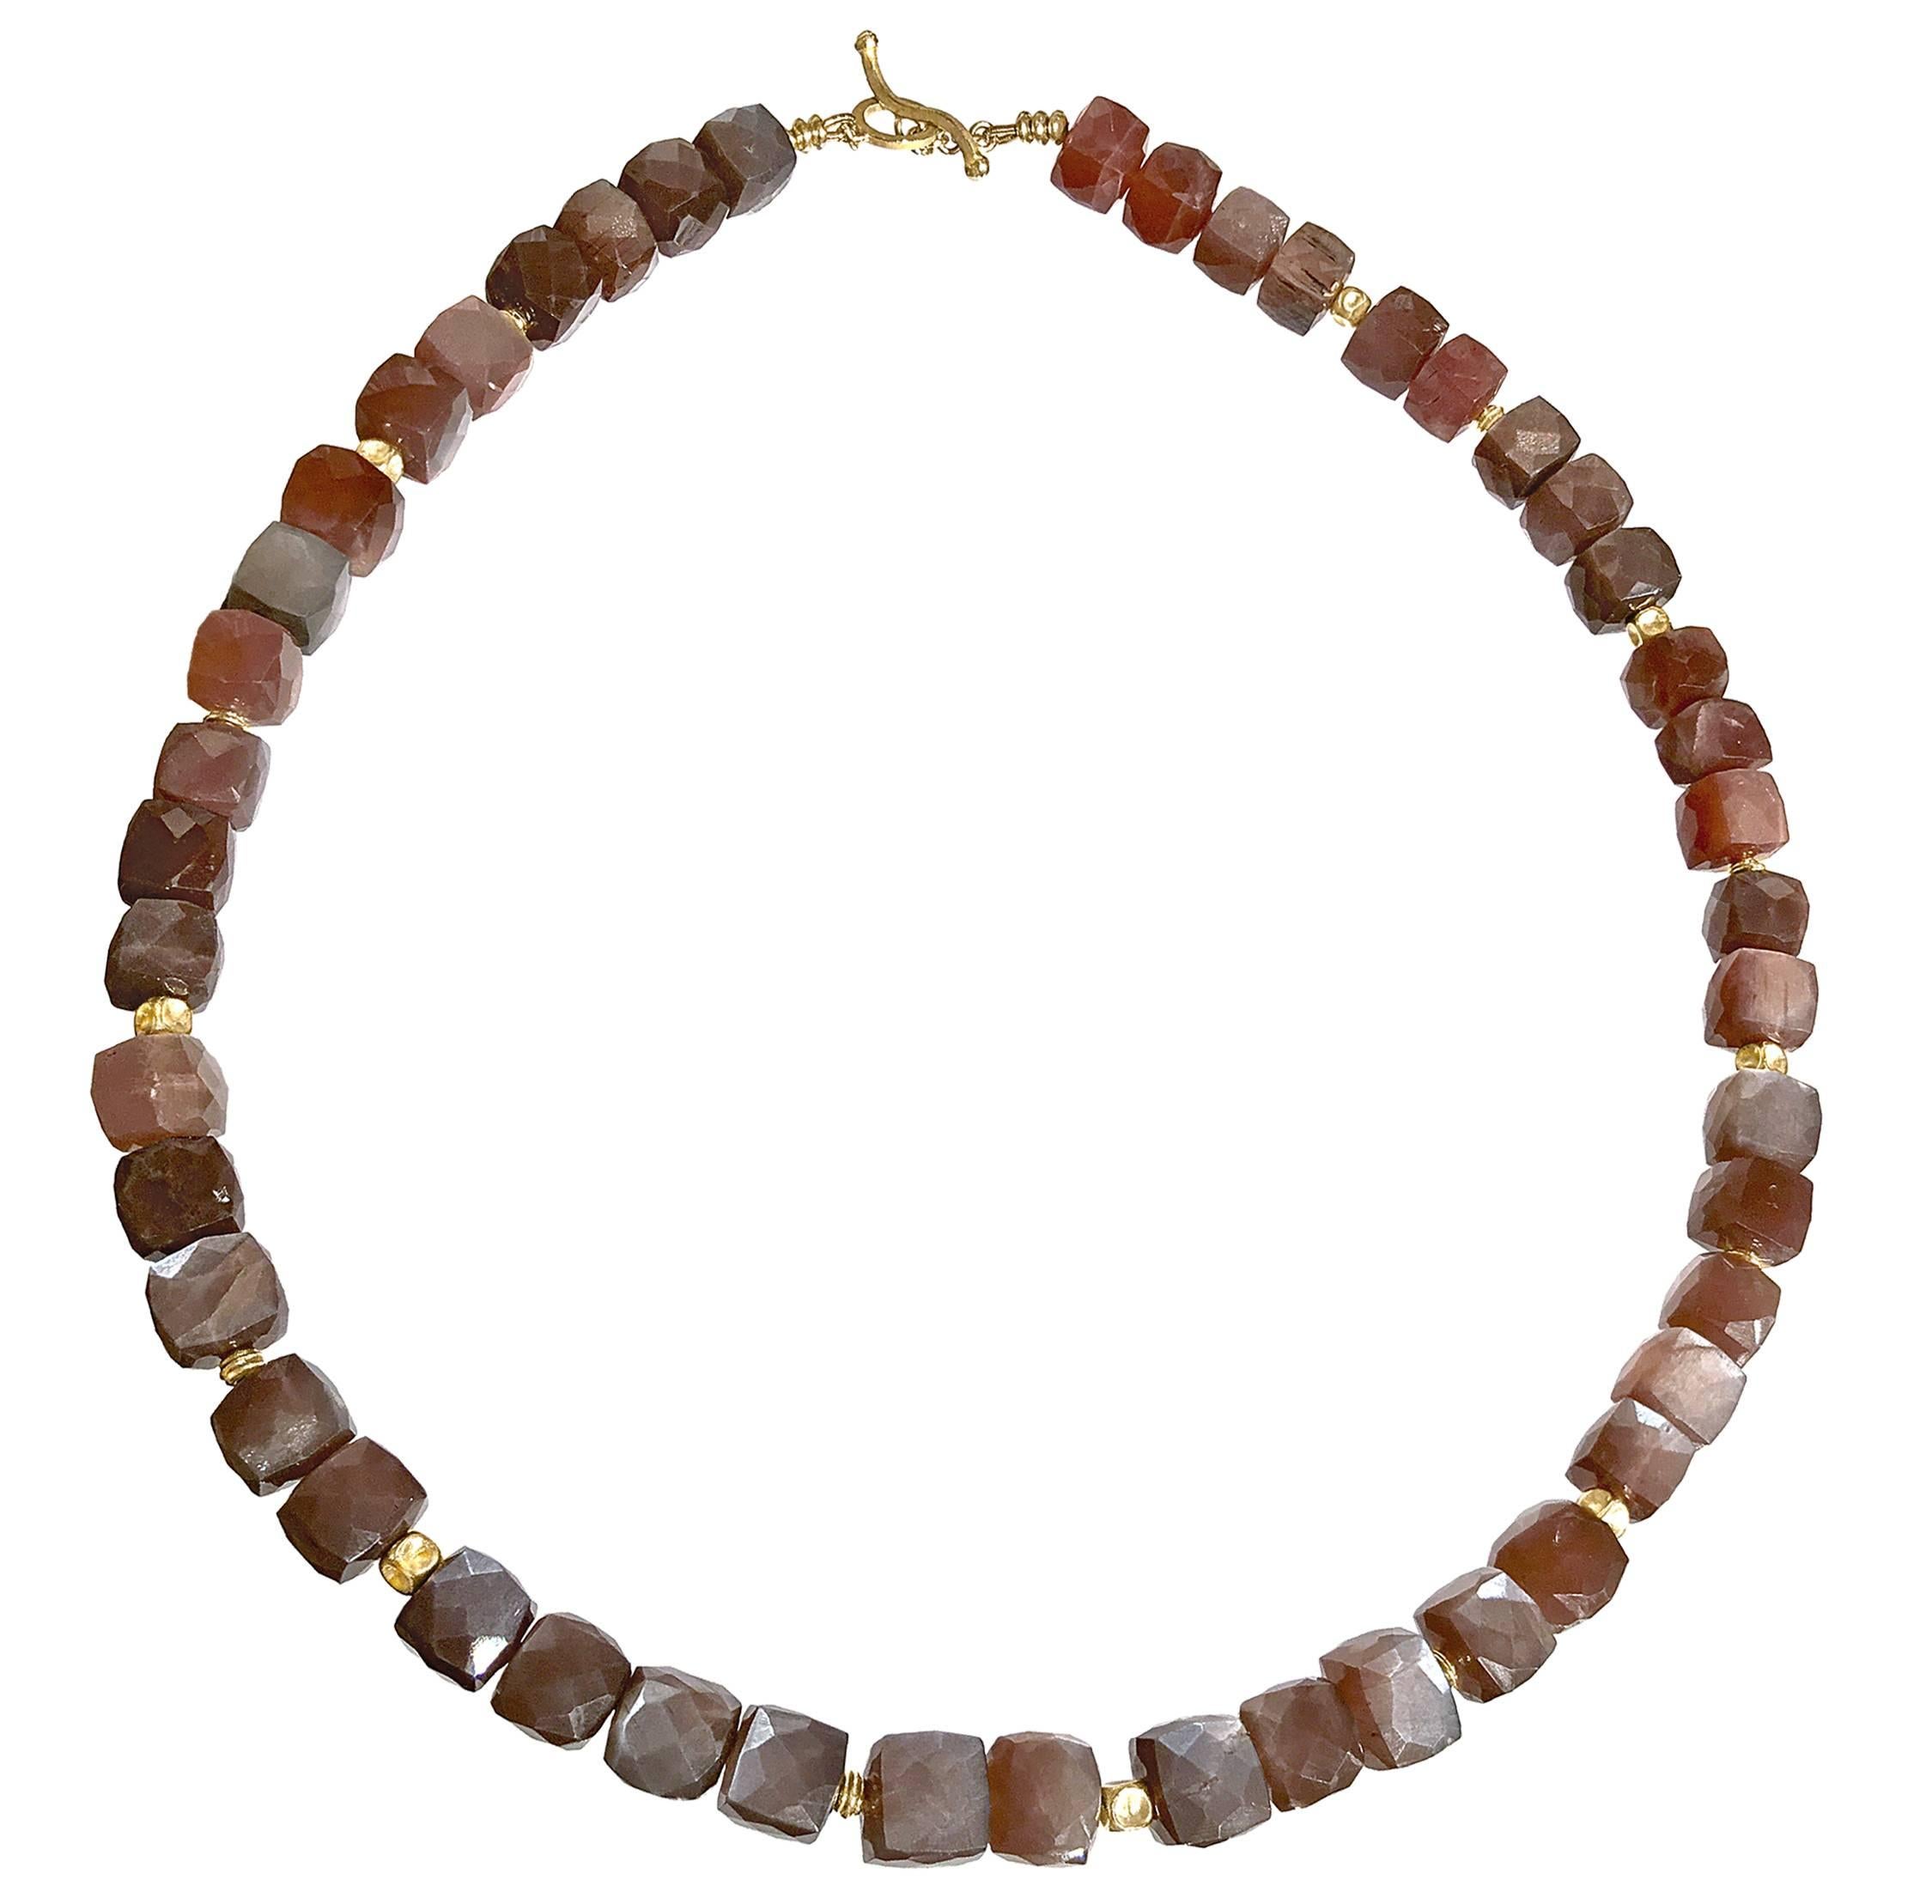 Barbara Heinrich Faceted Glowing Burgundy Moonstone Cube Gold Spacer Necklace